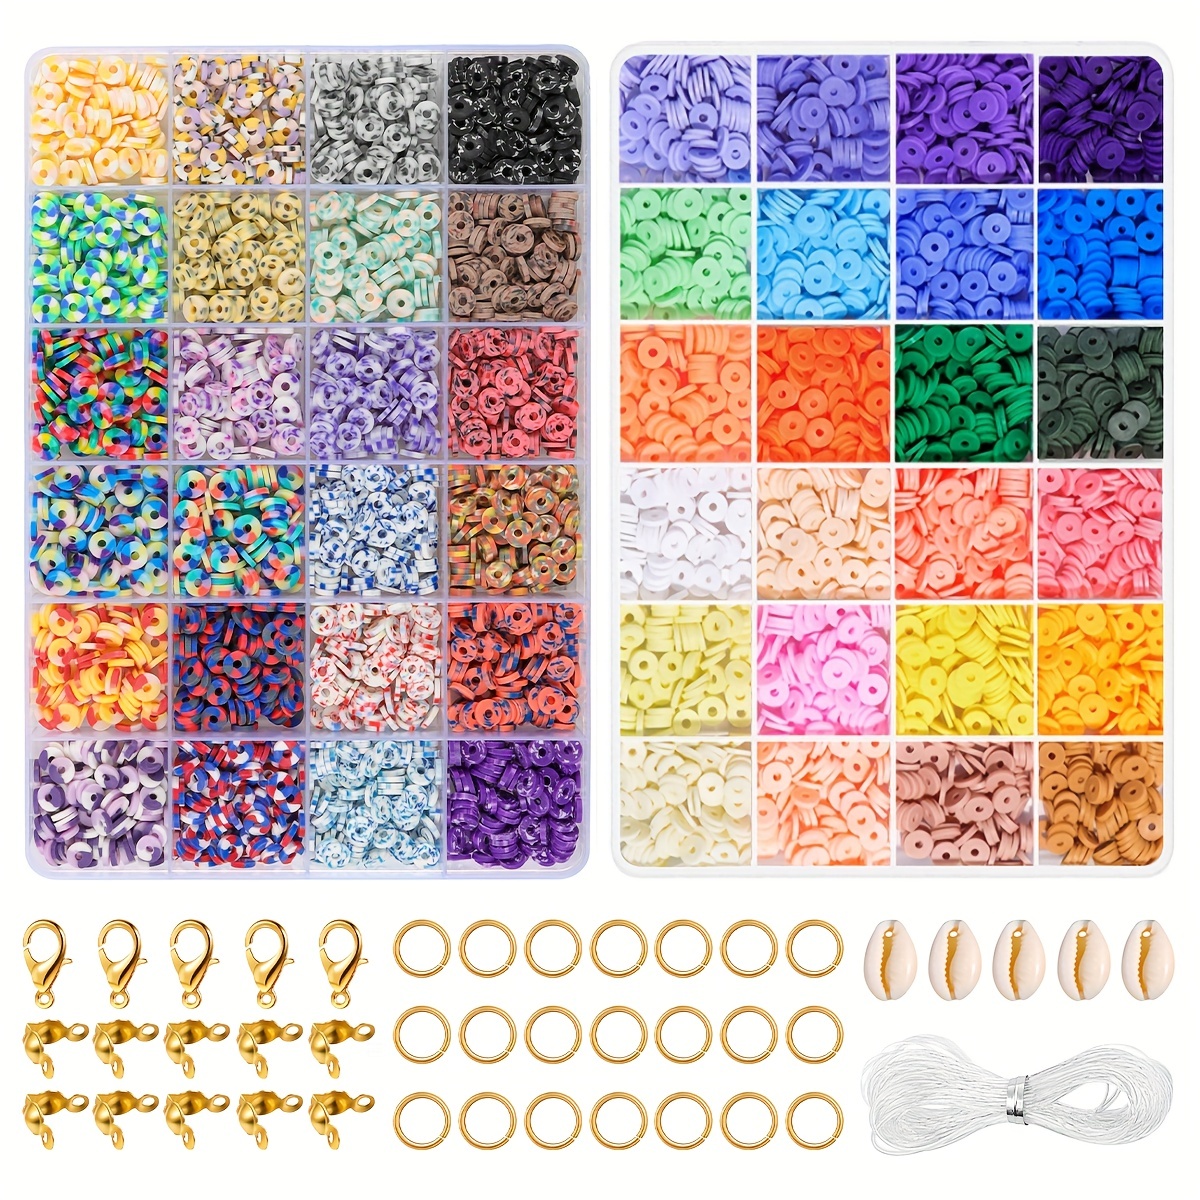 4800pcs 48 Colors Polymer Clay Beads Kit, Charm Bracelet Making Set For  Girls Aged 8-12, Diy Jewelry Beads And Craft Christmas Gift